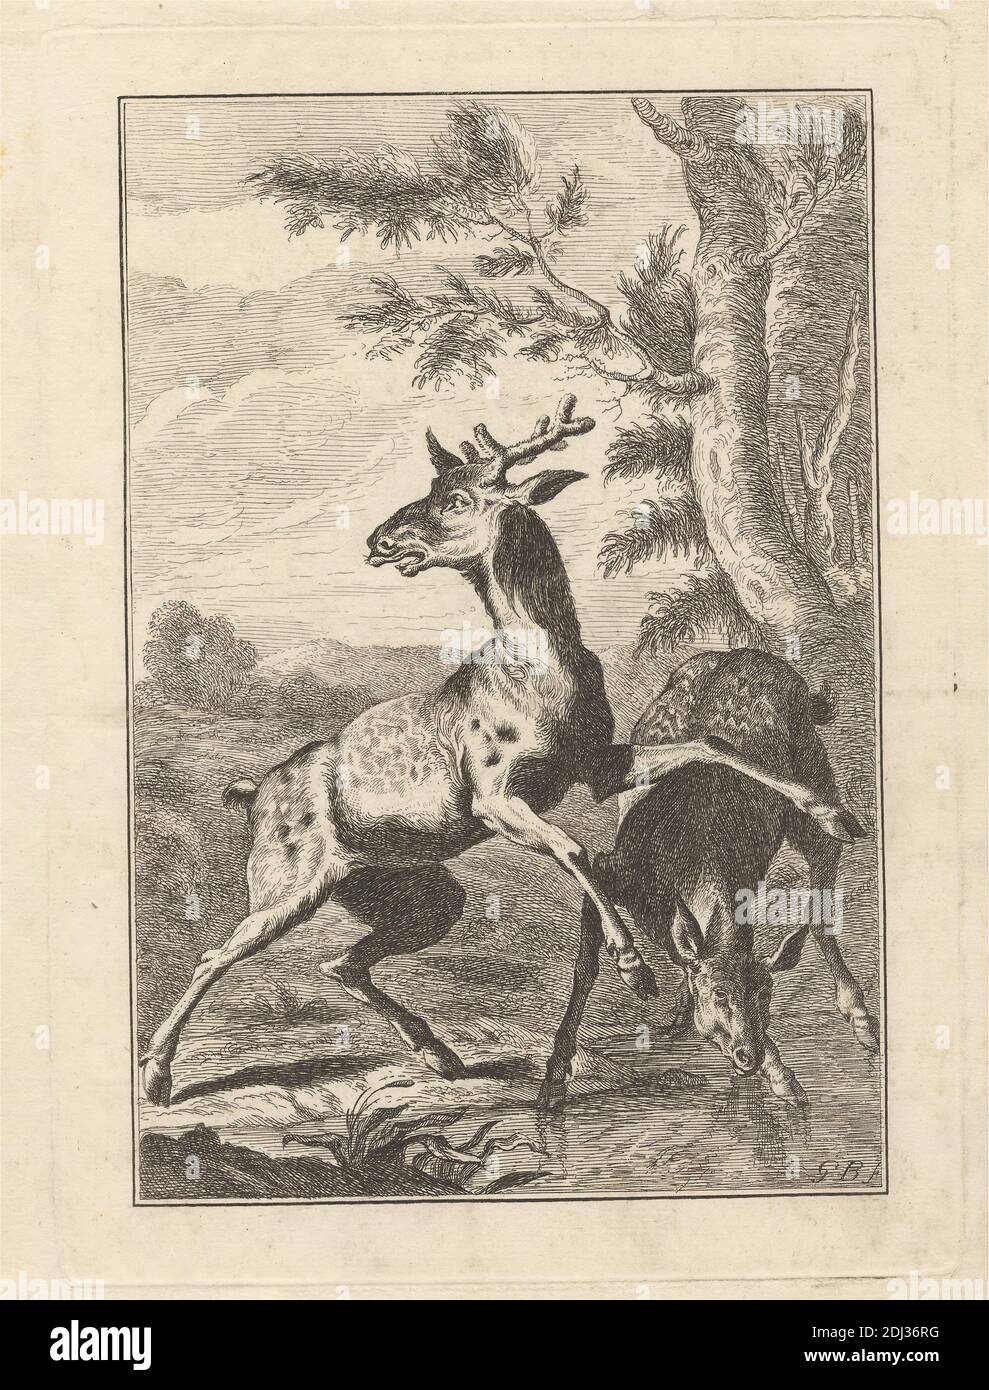 Two Deer, un PL. For 'A New Drawing Book...of beasts in Various actions' (1 de 9), Print Made by George Bickham, 1683/4–1758, British, After unknown Artist, Published by Henry Overton, 1675/6–1751, British, Undate, Etching on medium, Smooth, crème poed paper, Sheet: 11 5/16 x 7 5/16 pouces (28.8 x 18.6 cm), plaque: 8 7/16 x 6 1/8 pouces (21.5 x 15.5 cm), et image: 7 3/8 x 5 pouces (18.8 x 12.7 cm), art animal, buck, nuages, cerf, doe, peur, forêt, collines, plantes, étang, arbres Banque D'Images